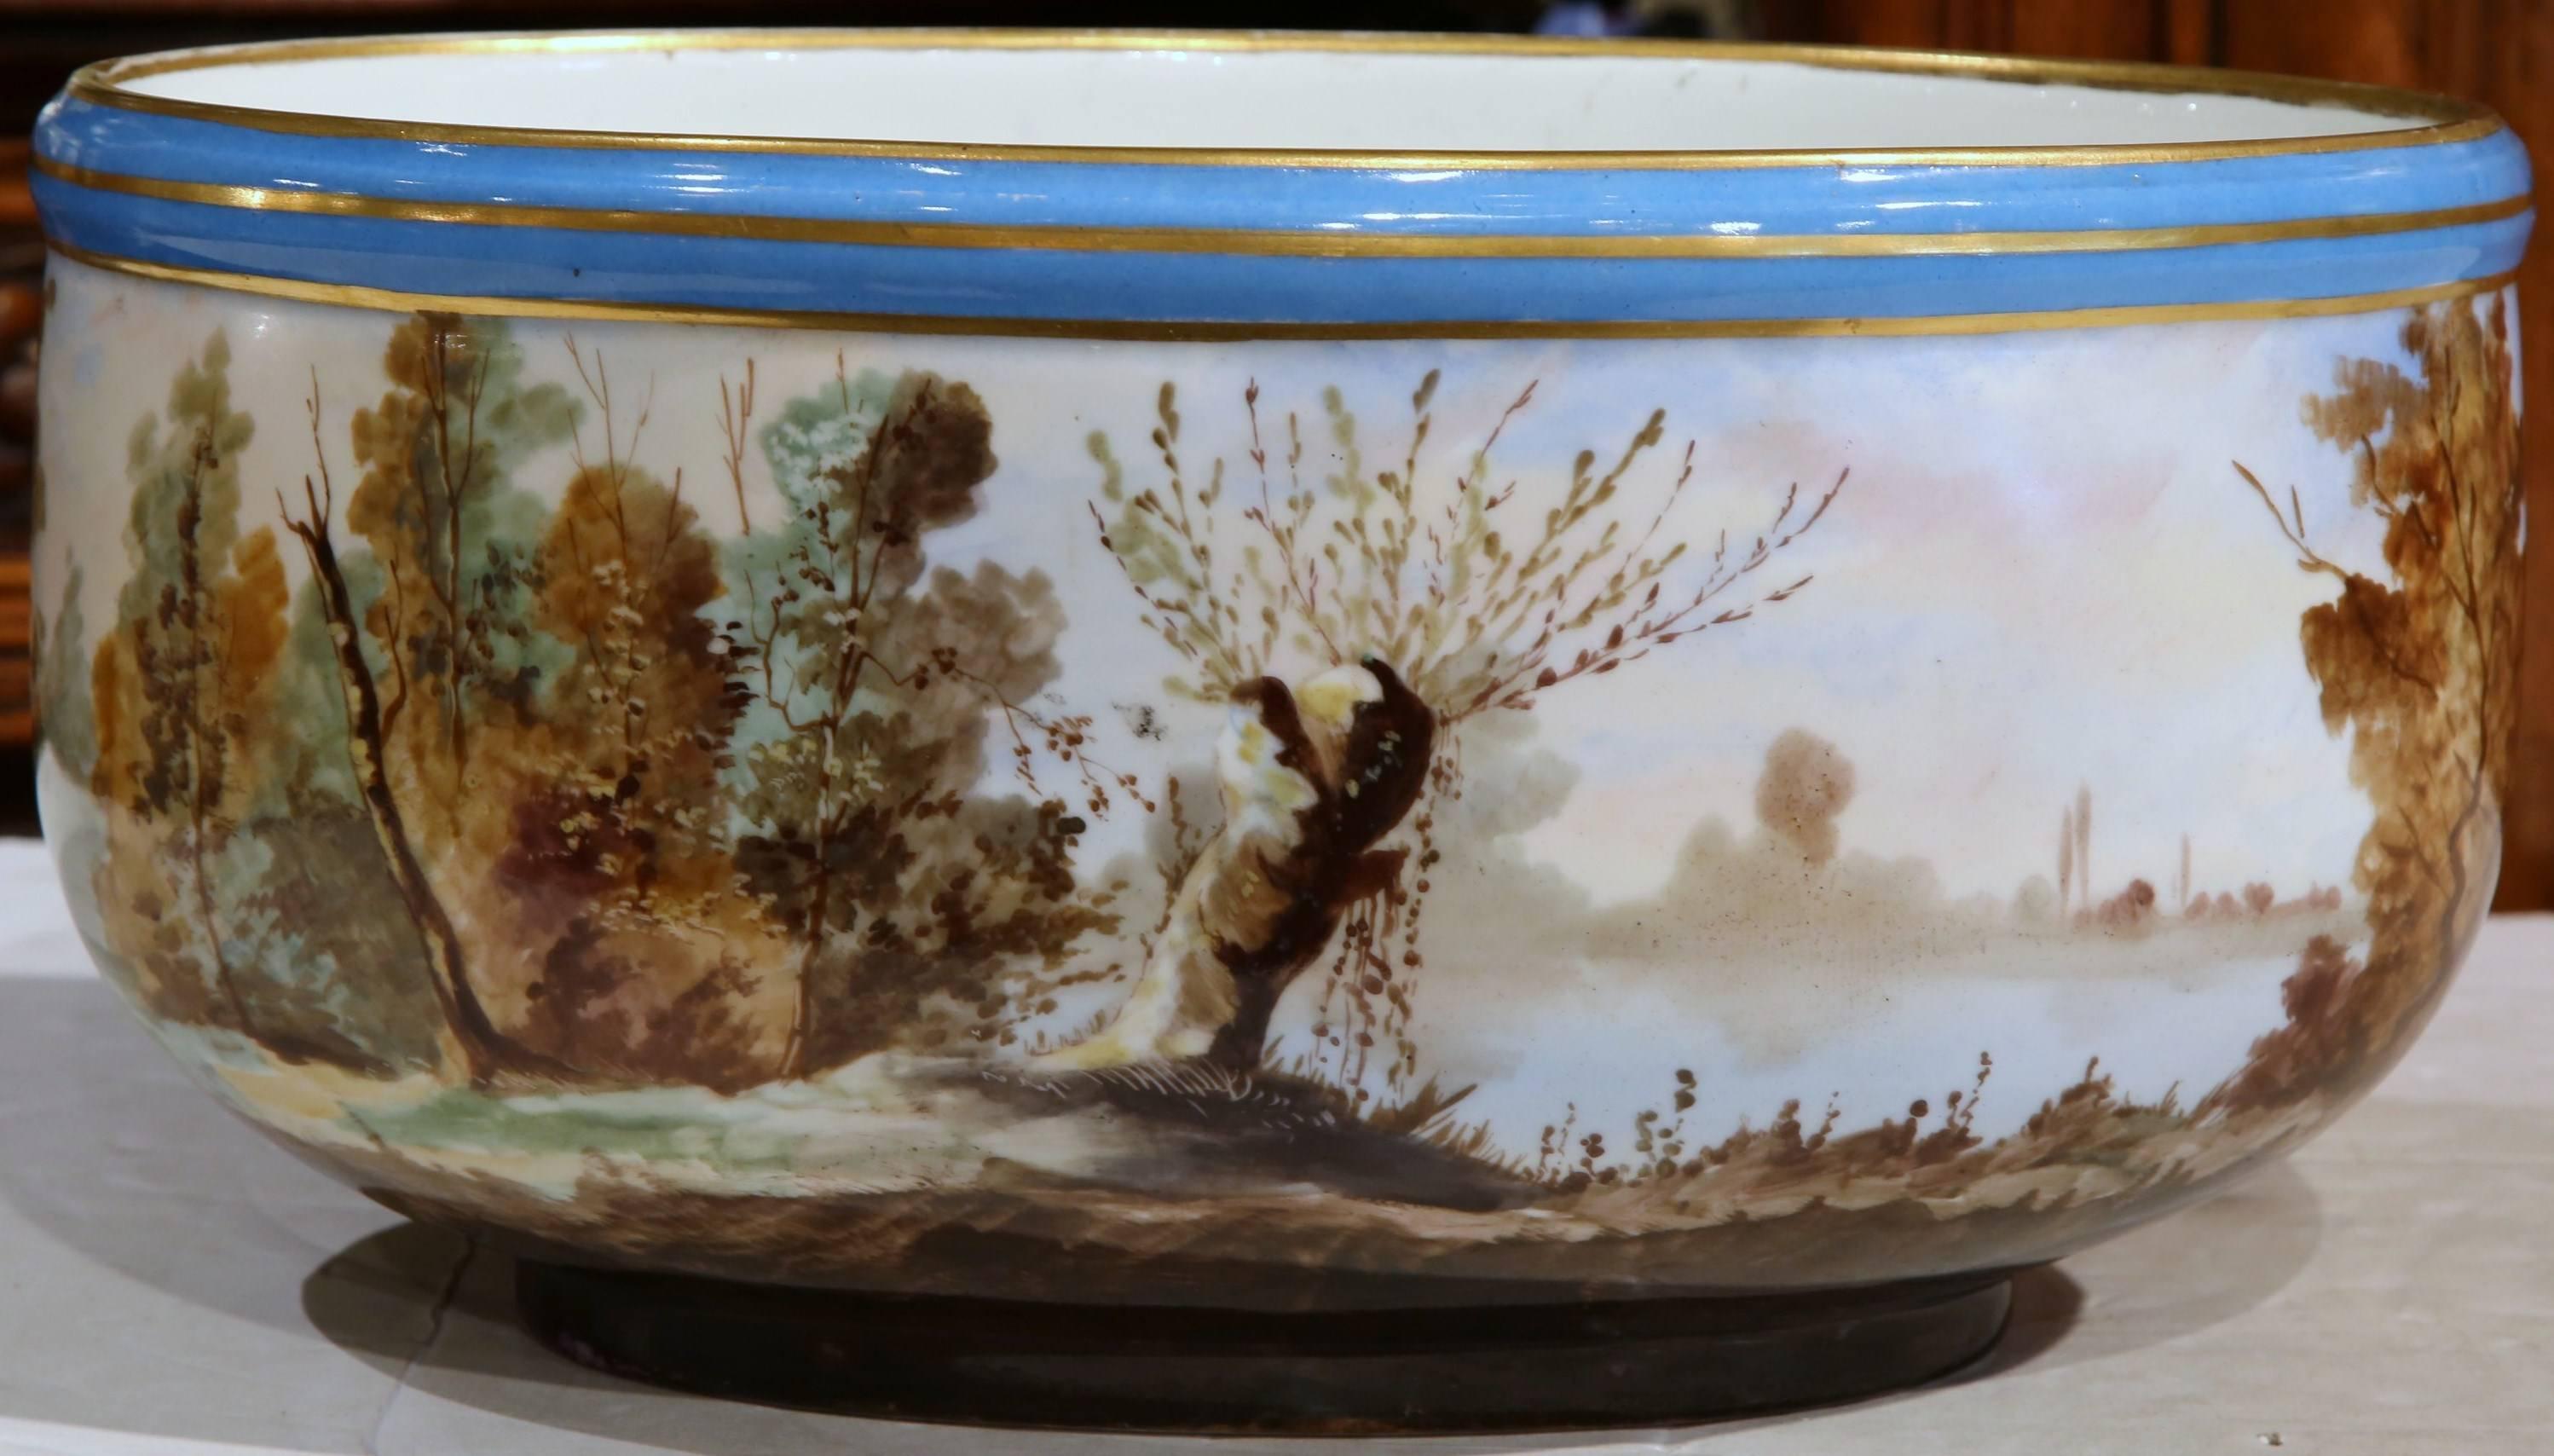 Decorate a shelf or tabletop with this large, hand-painted jardinière from Paris, France, circa 1860; this antique oval planter depicts a colorful harvest scene with cows and farmers picking hay. The porcelain piece is very detailed with vivid